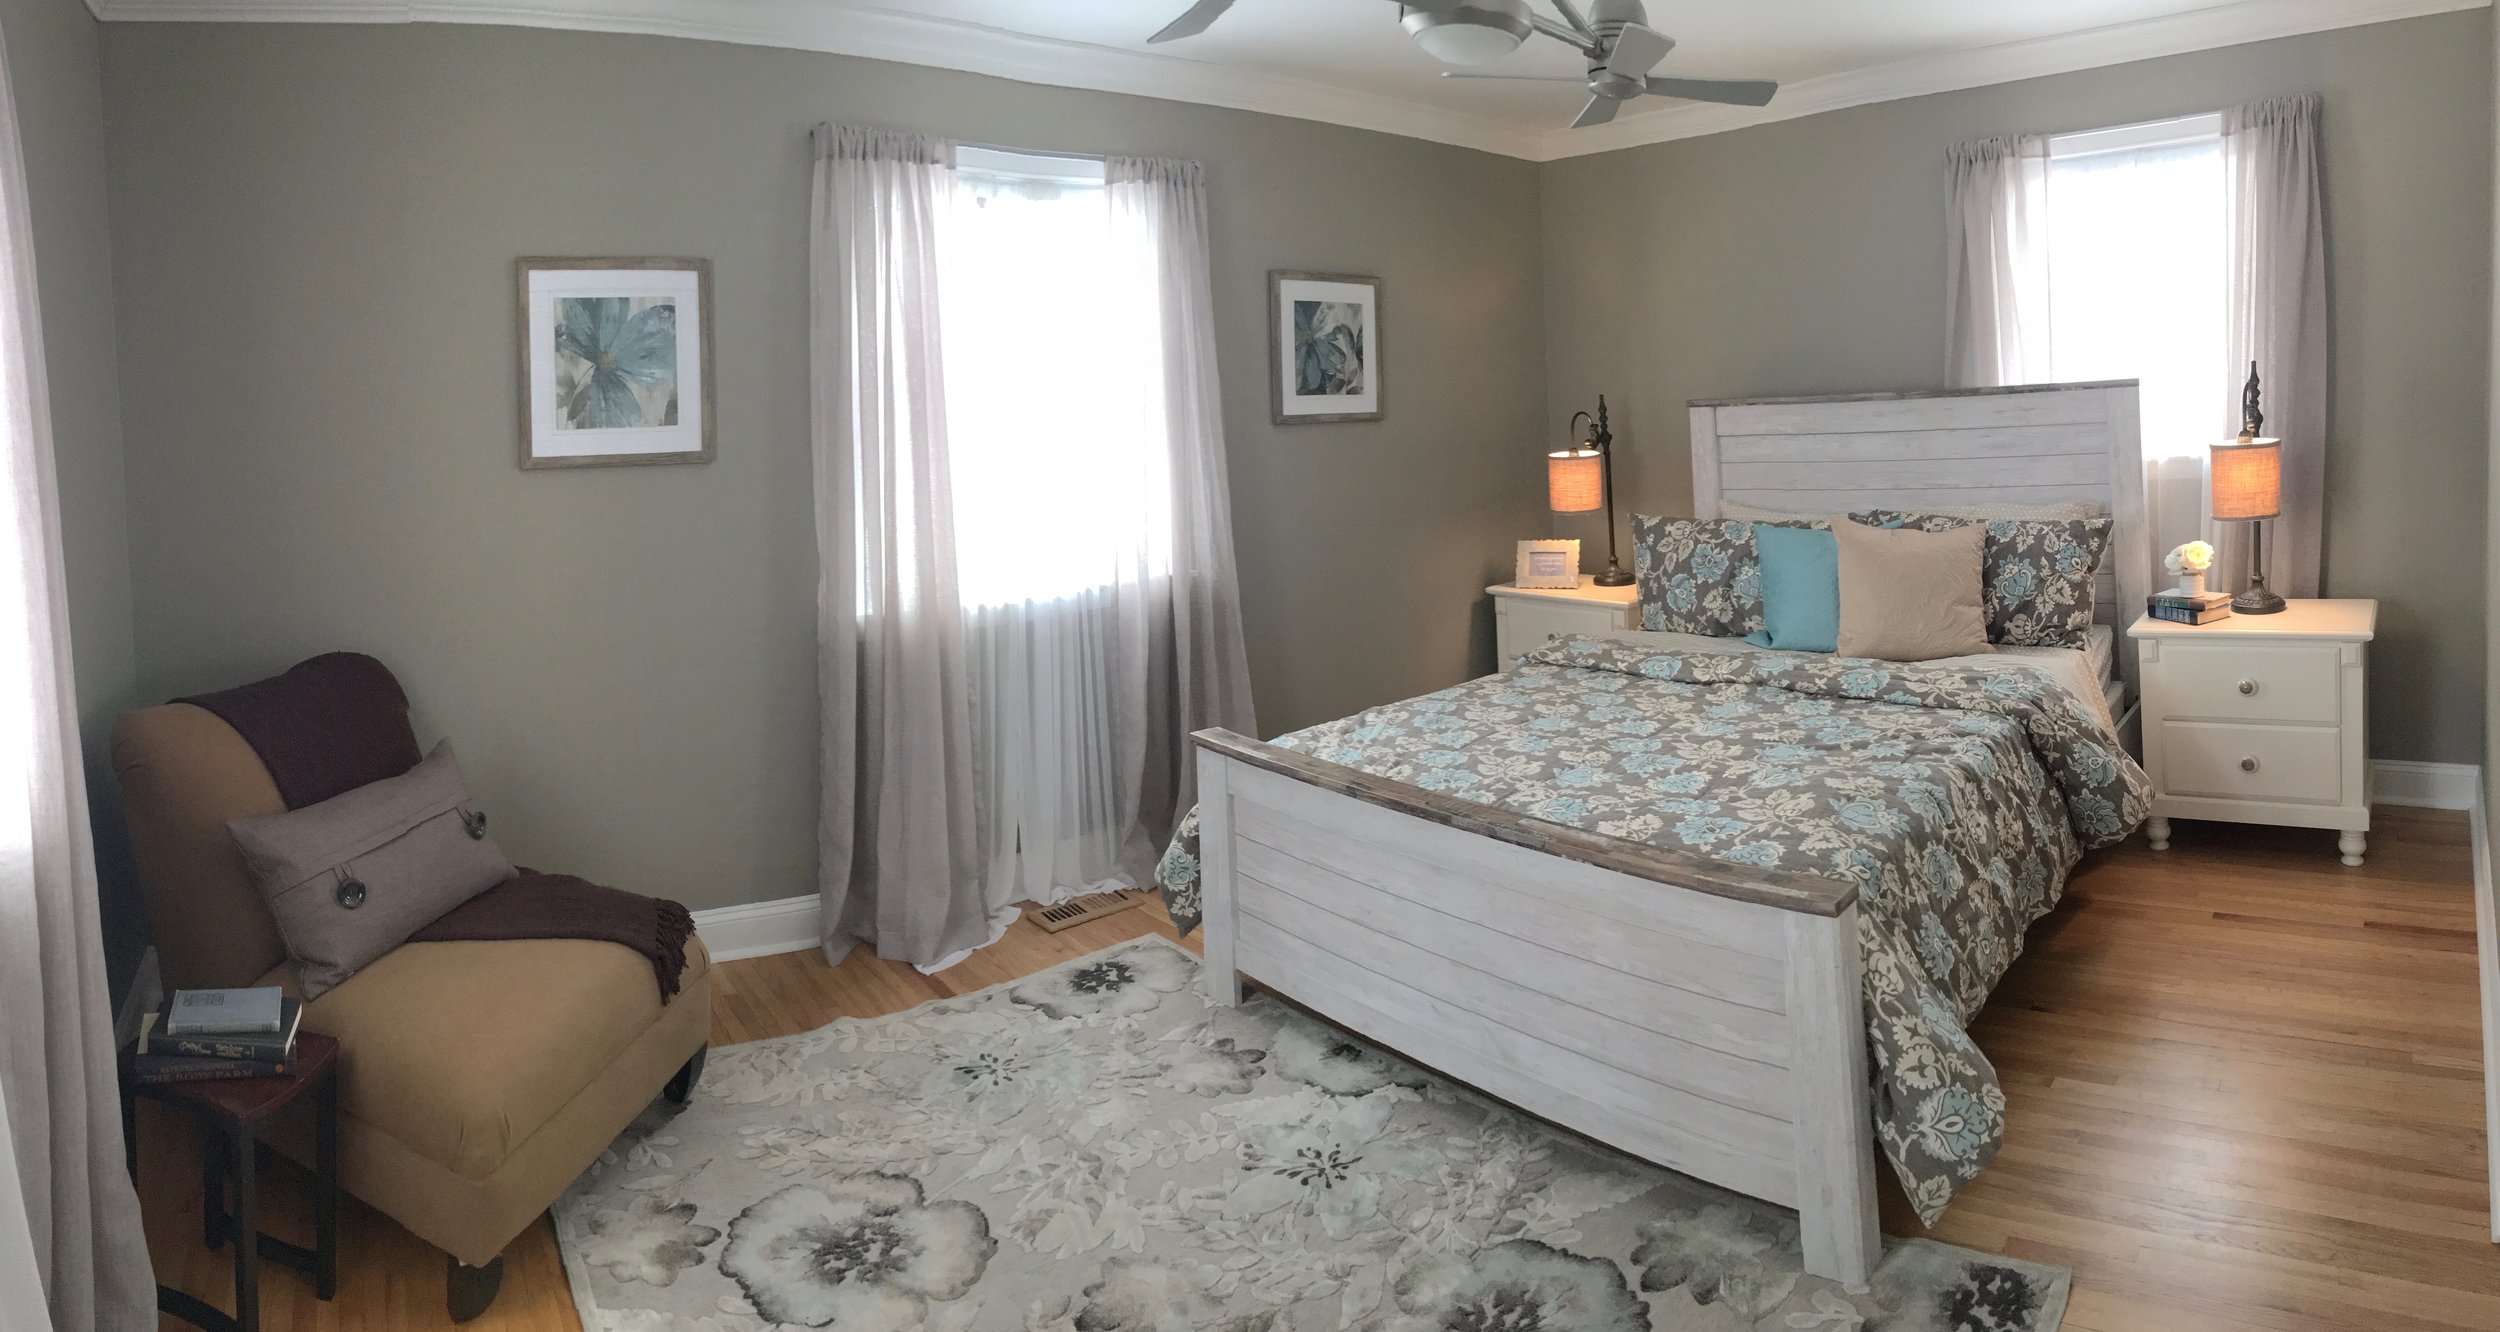 Sorted Affairs Professional Staging - BedRoom After